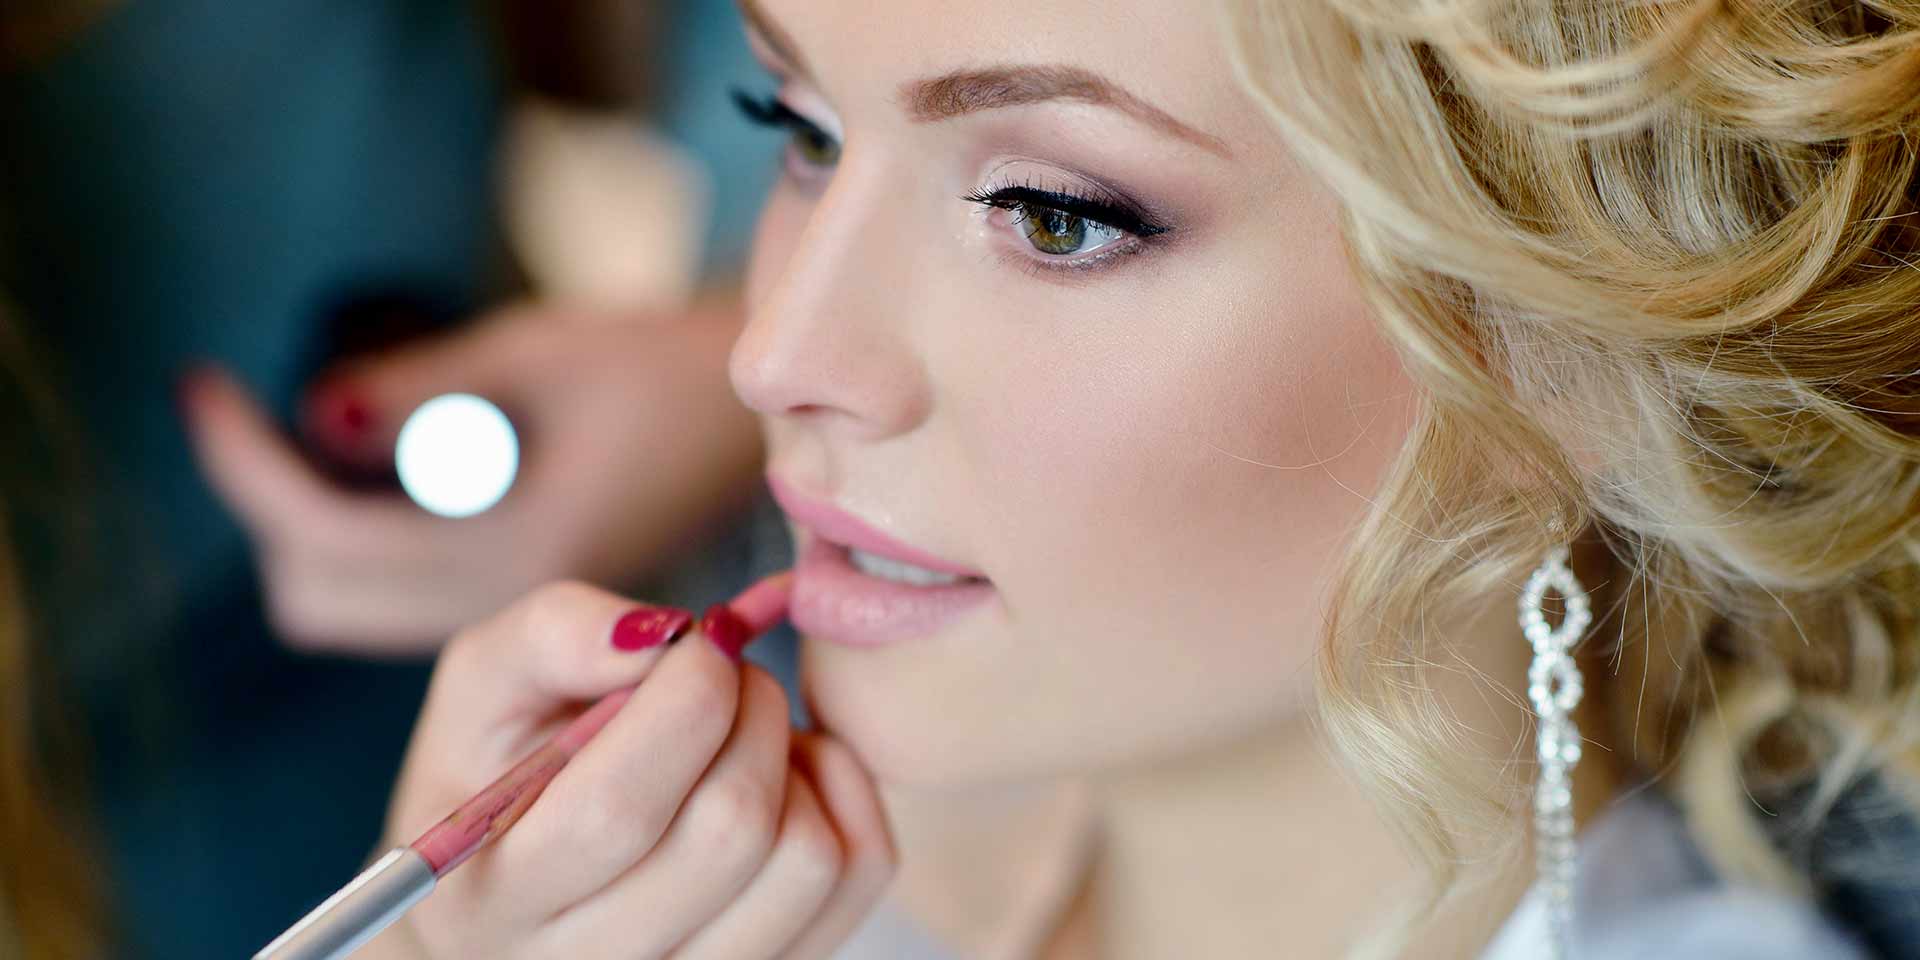 How To Find A Wedding Hair Stylist And Makeup Artist